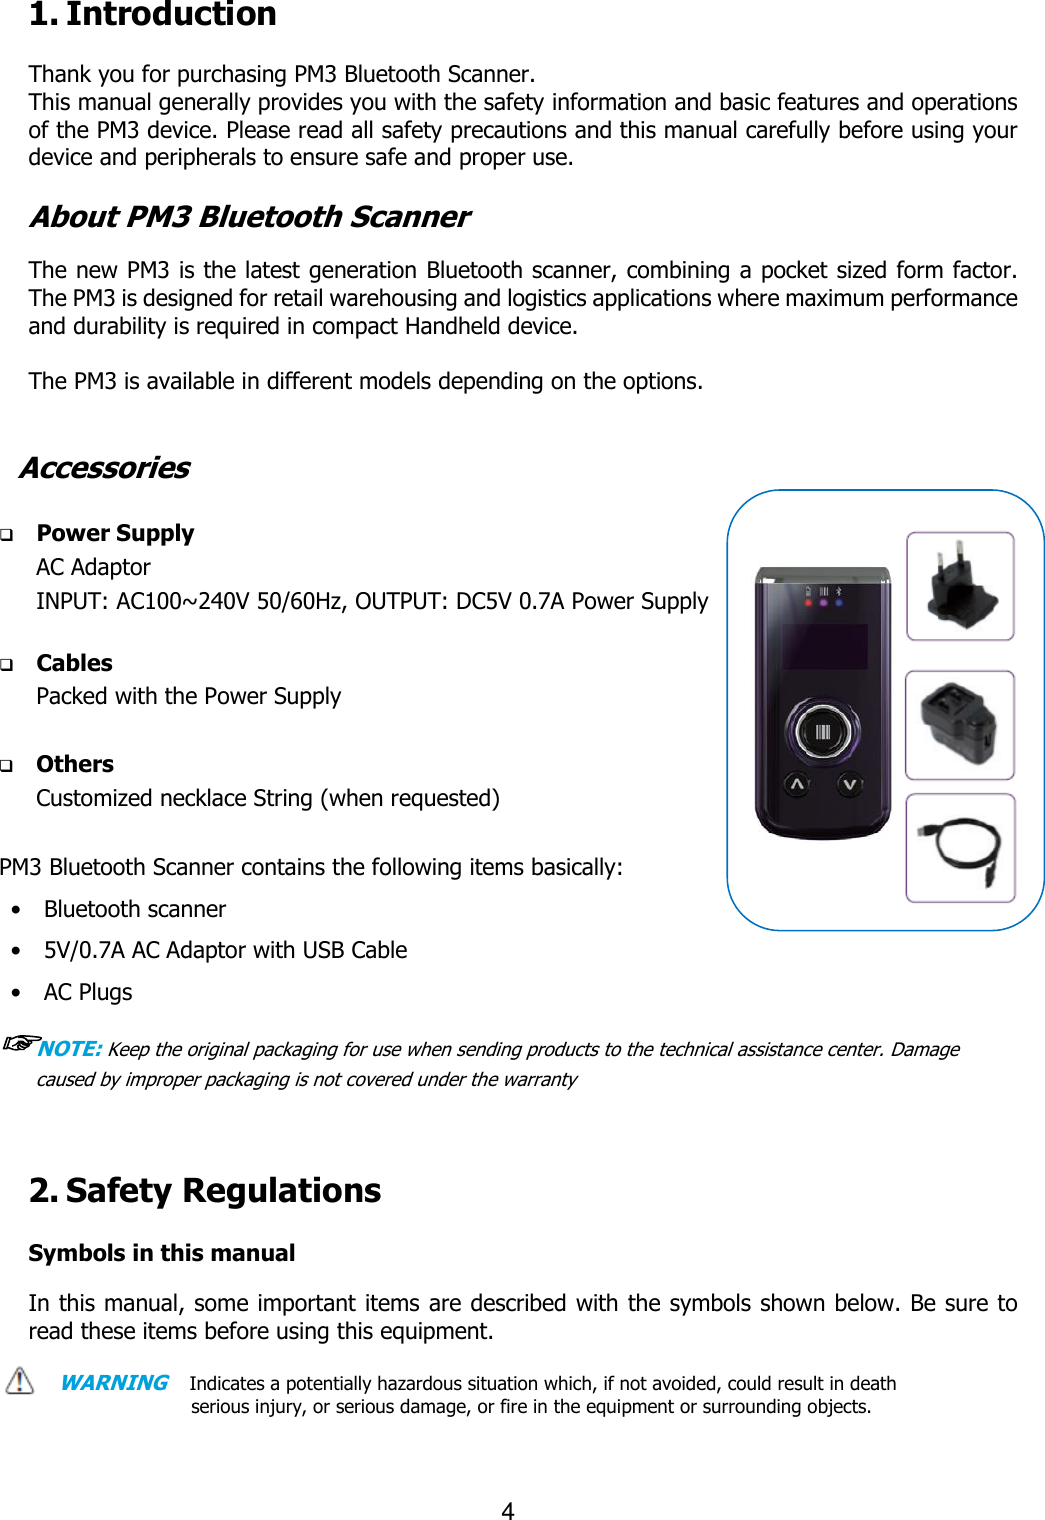                                                                    4  1. Introduction  Thank you for purchasing PM3 Bluetooth Scanner.   This manual generally provides you with the safety information and basic features and operations of the PM3 device. Please read all safety precautions and this manual carefully before using your device and peripherals to ensure safe and proper use.  About PM3 Bluetooth Scanner  The new PM3 is the latest generation Bluetooth scanner, combining a pocket sized form factor. The PM3 is designed for retail warehousing and logistics applications where maximum performance and durability is required in compact Handheld device.    The PM3 is available in different models depending on the options.     Accessories   Power Supply AC Adaptor INPUT: AC100~240V 50/60Hz, OUTPUT: DC5V 0.7A Power Supply     Cables Packed with the Power Supply   Others Customized necklace String (when requested)  PM3 Bluetooth Scanner contains the following items basically: •    Bluetooth scanner •    5V/0.7A AC Adaptor with USB Cable •    AC Plugs   ☞NOTE: Keep the original packaging for use when sending products to the technical assistance center. Damage caused by improper packaging is not covered under the warranty    2. Safety Regulations    Symbols in this manual  In this manual, some important items are described with the symbols shown below. Be sure to read these items before using this equipment.    WARNING   Indicates a potentially hazardous situation which, if not avoided, could result in death serious injury, or serious damage, or fire in the equipment or surrounding objects.    